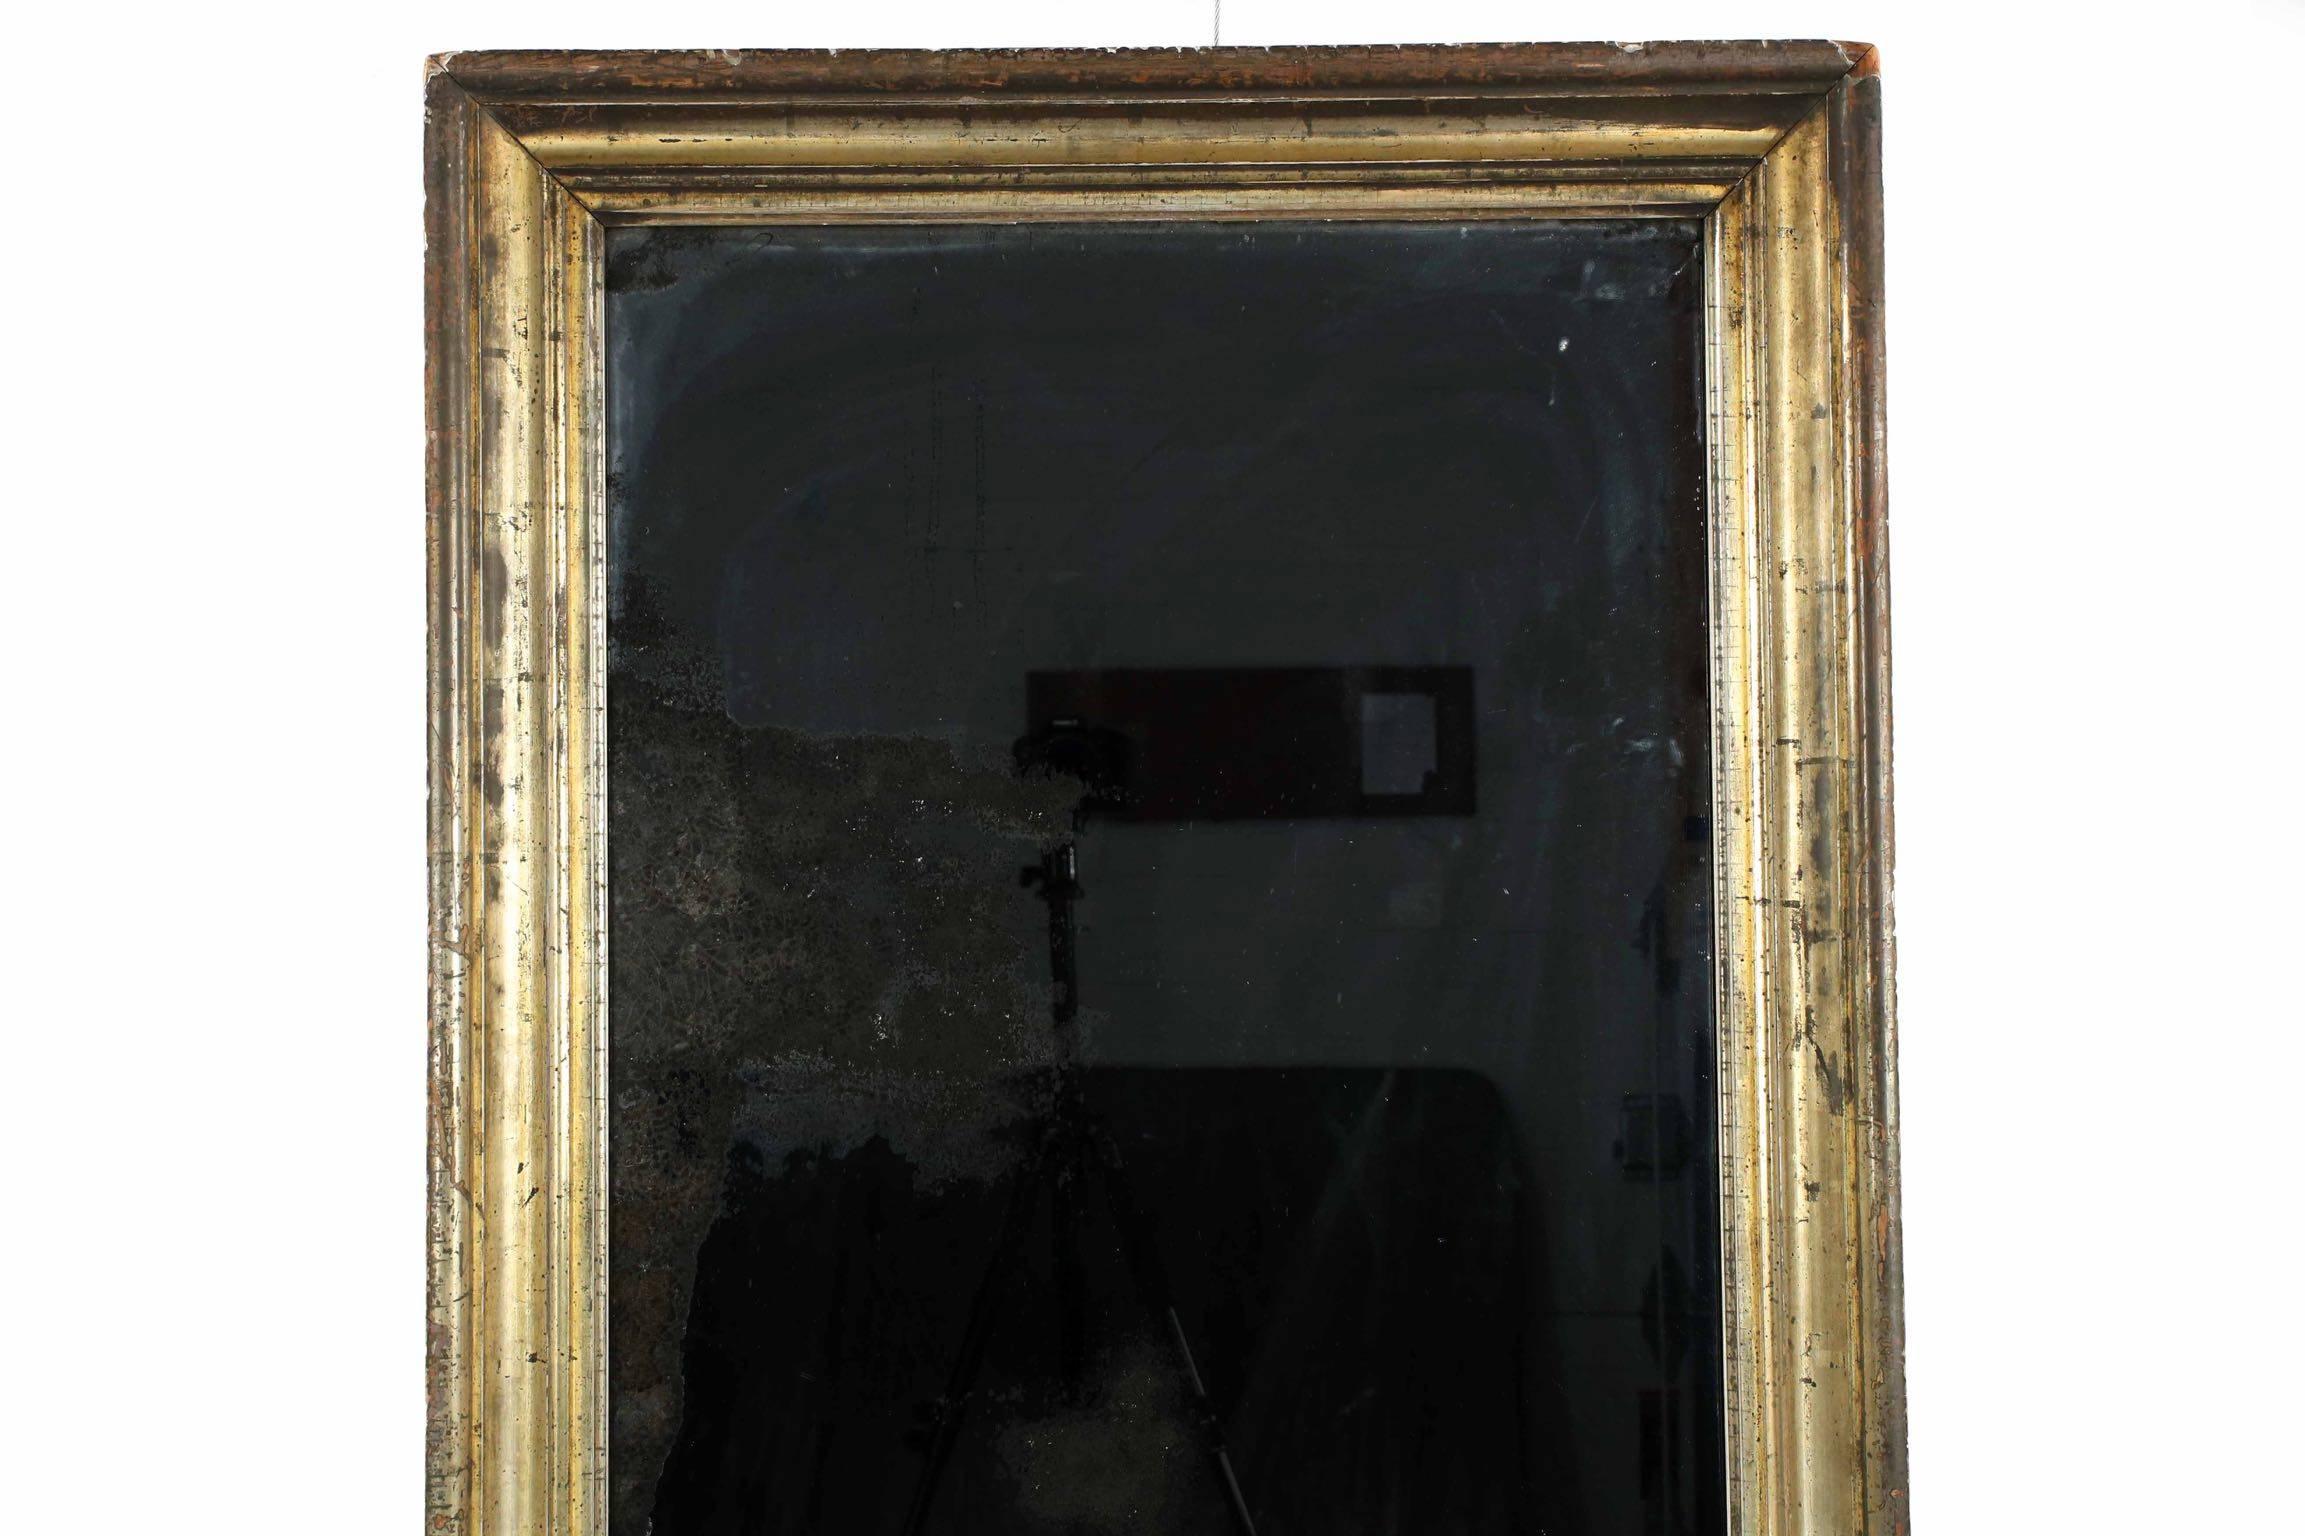 This is such an interesting and beautifully worn piece, retaining much of its original burnished gilding, now oxidized with a slowly developed patina throughout, the frame is noteworthy for its sheer austerity. A simple cove molding surrounds the